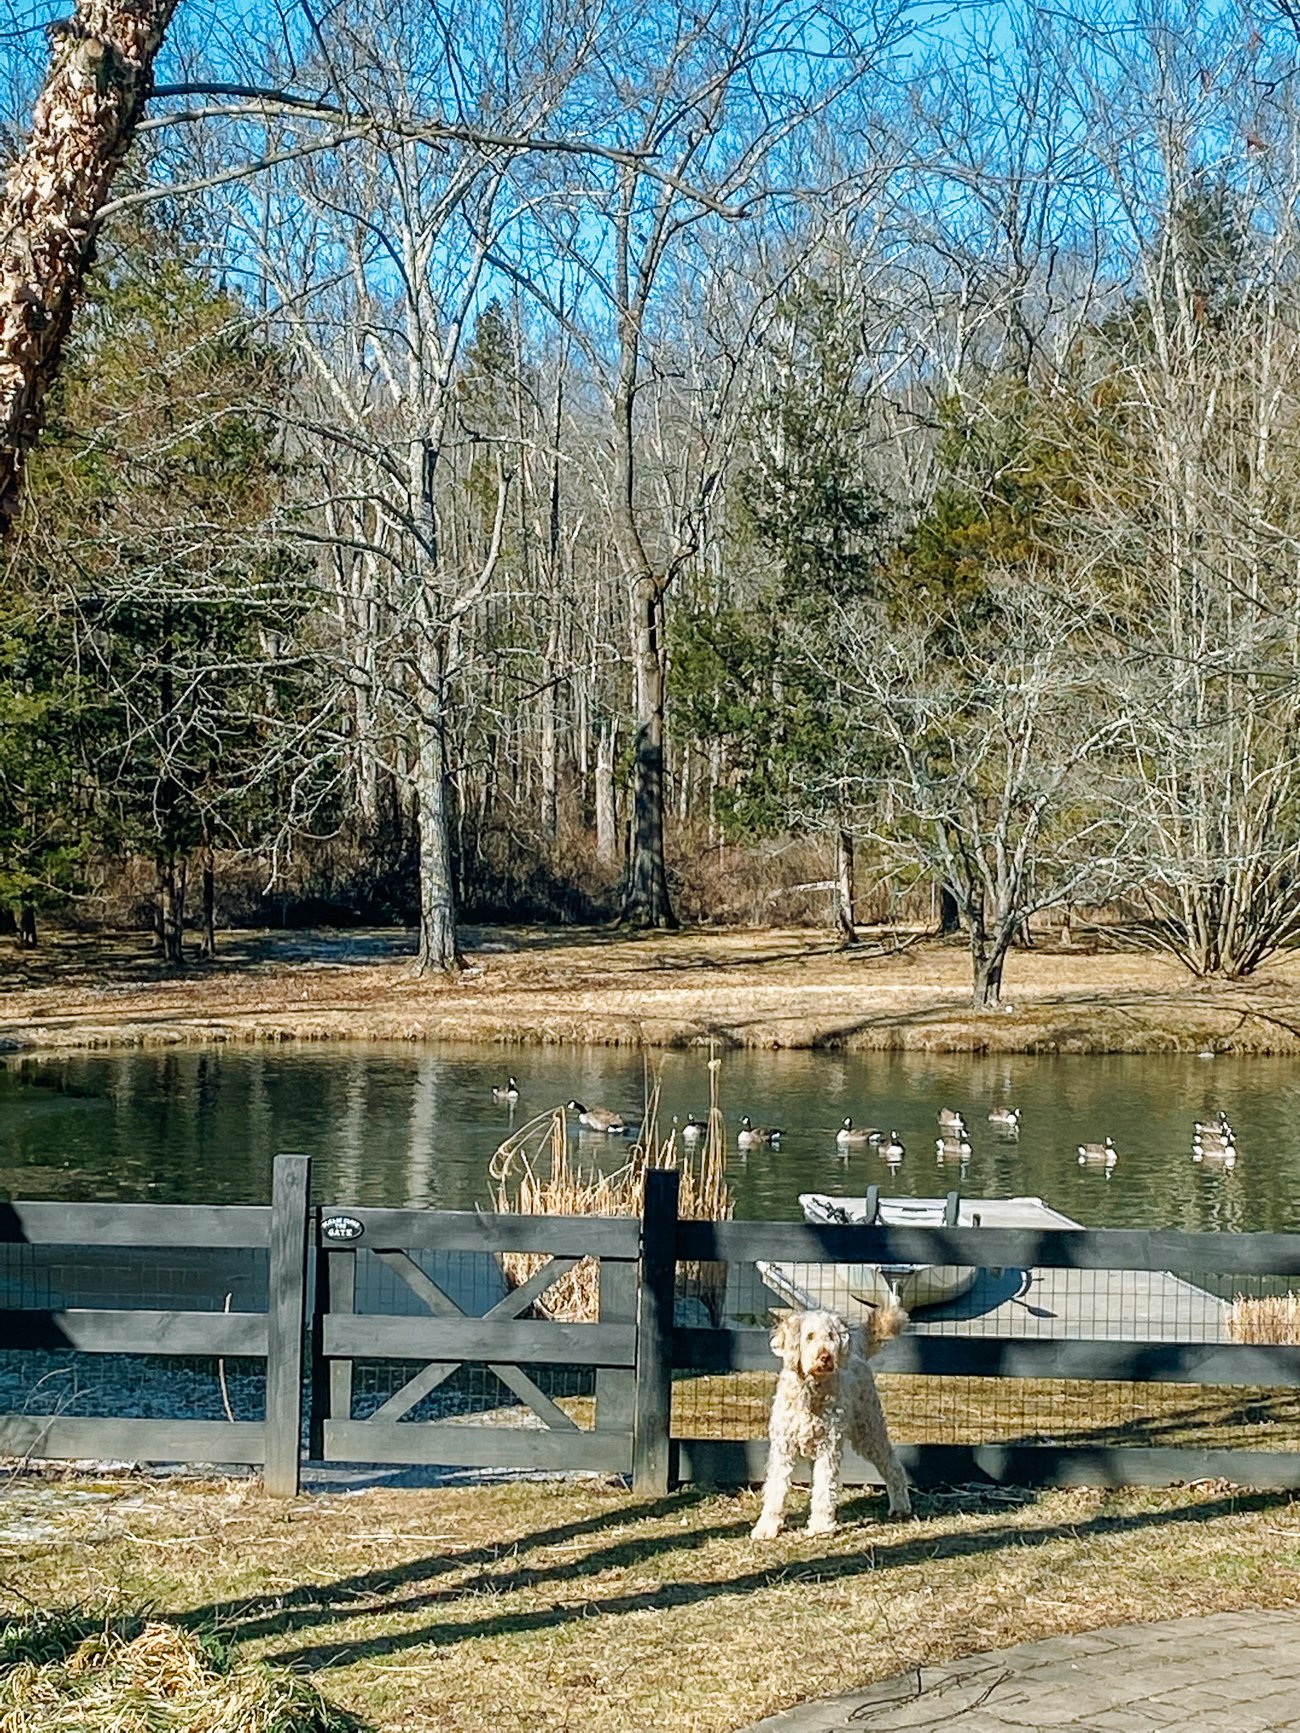 Dog in front of fence with Canada geese in pond in background